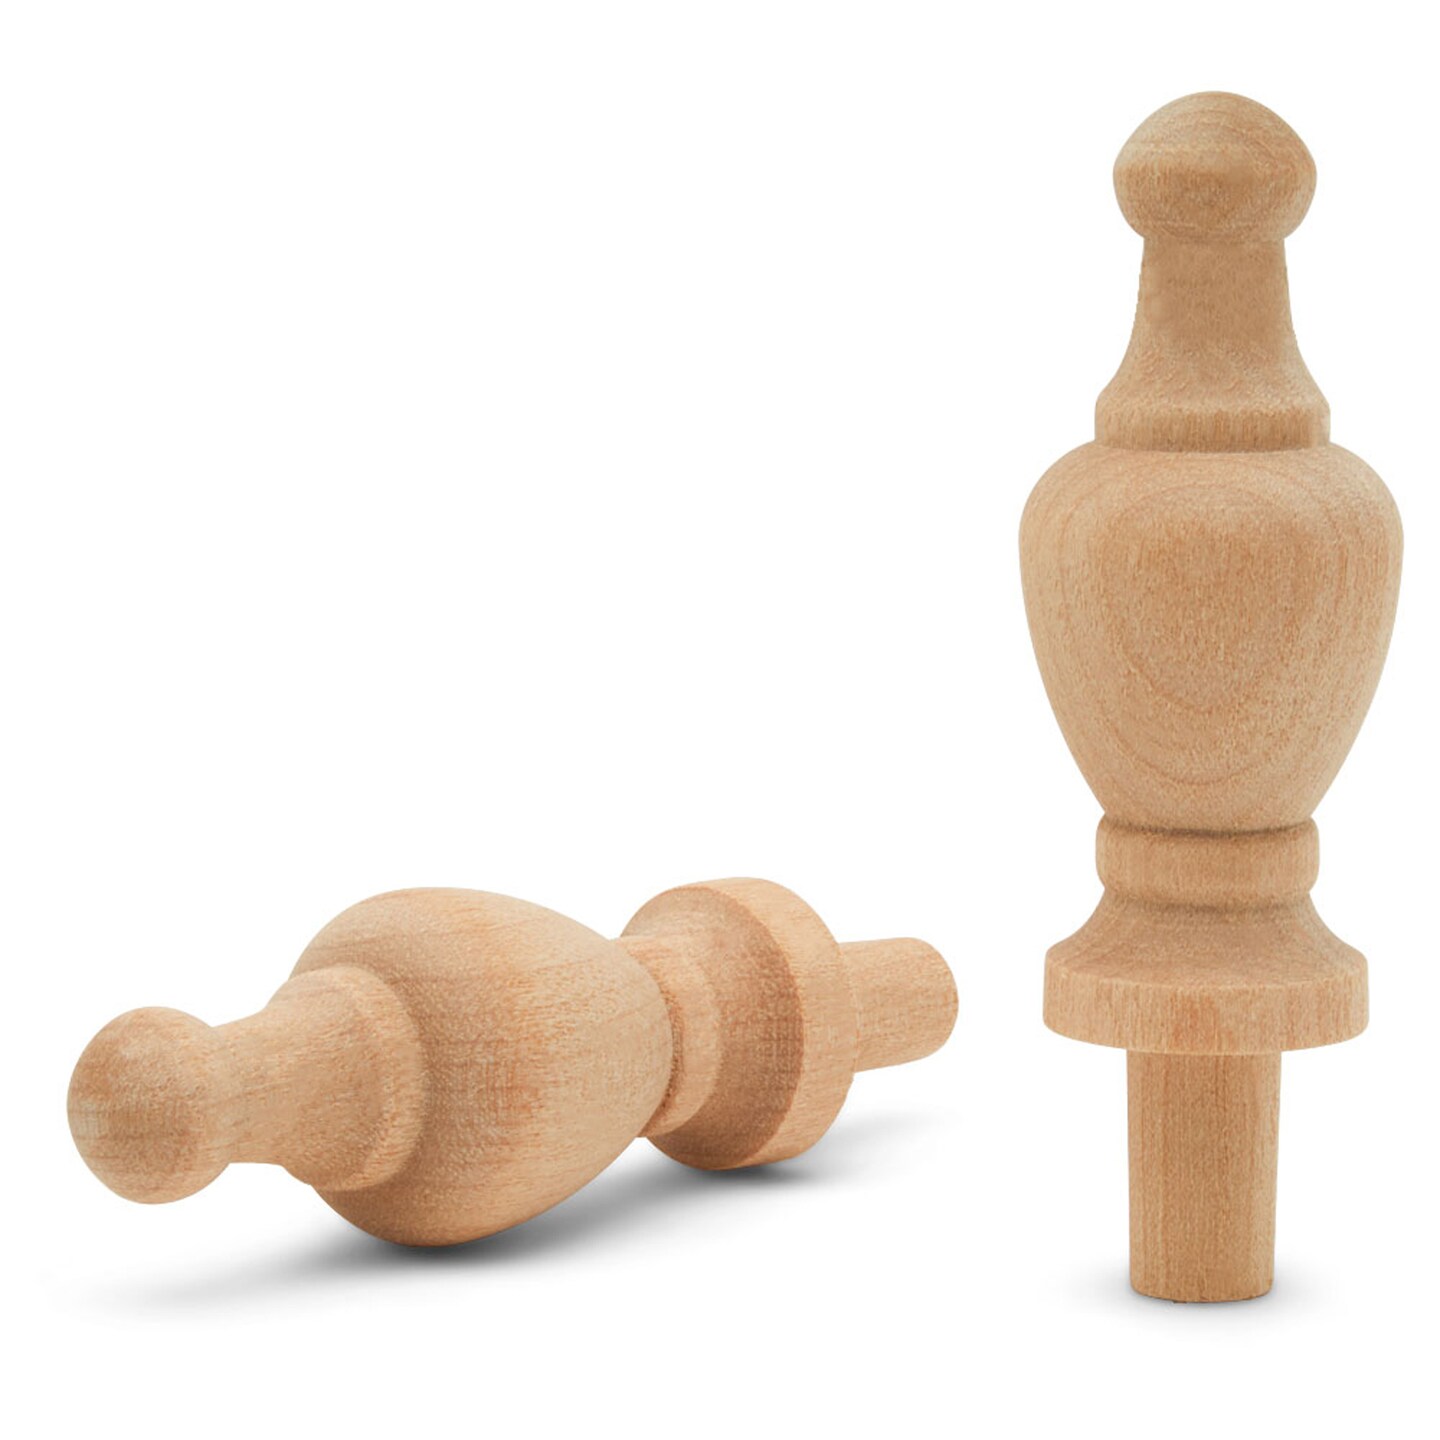 Wood Finials, 2-7/8 inch for Crafting & DIY Dcor, Woodpeckers